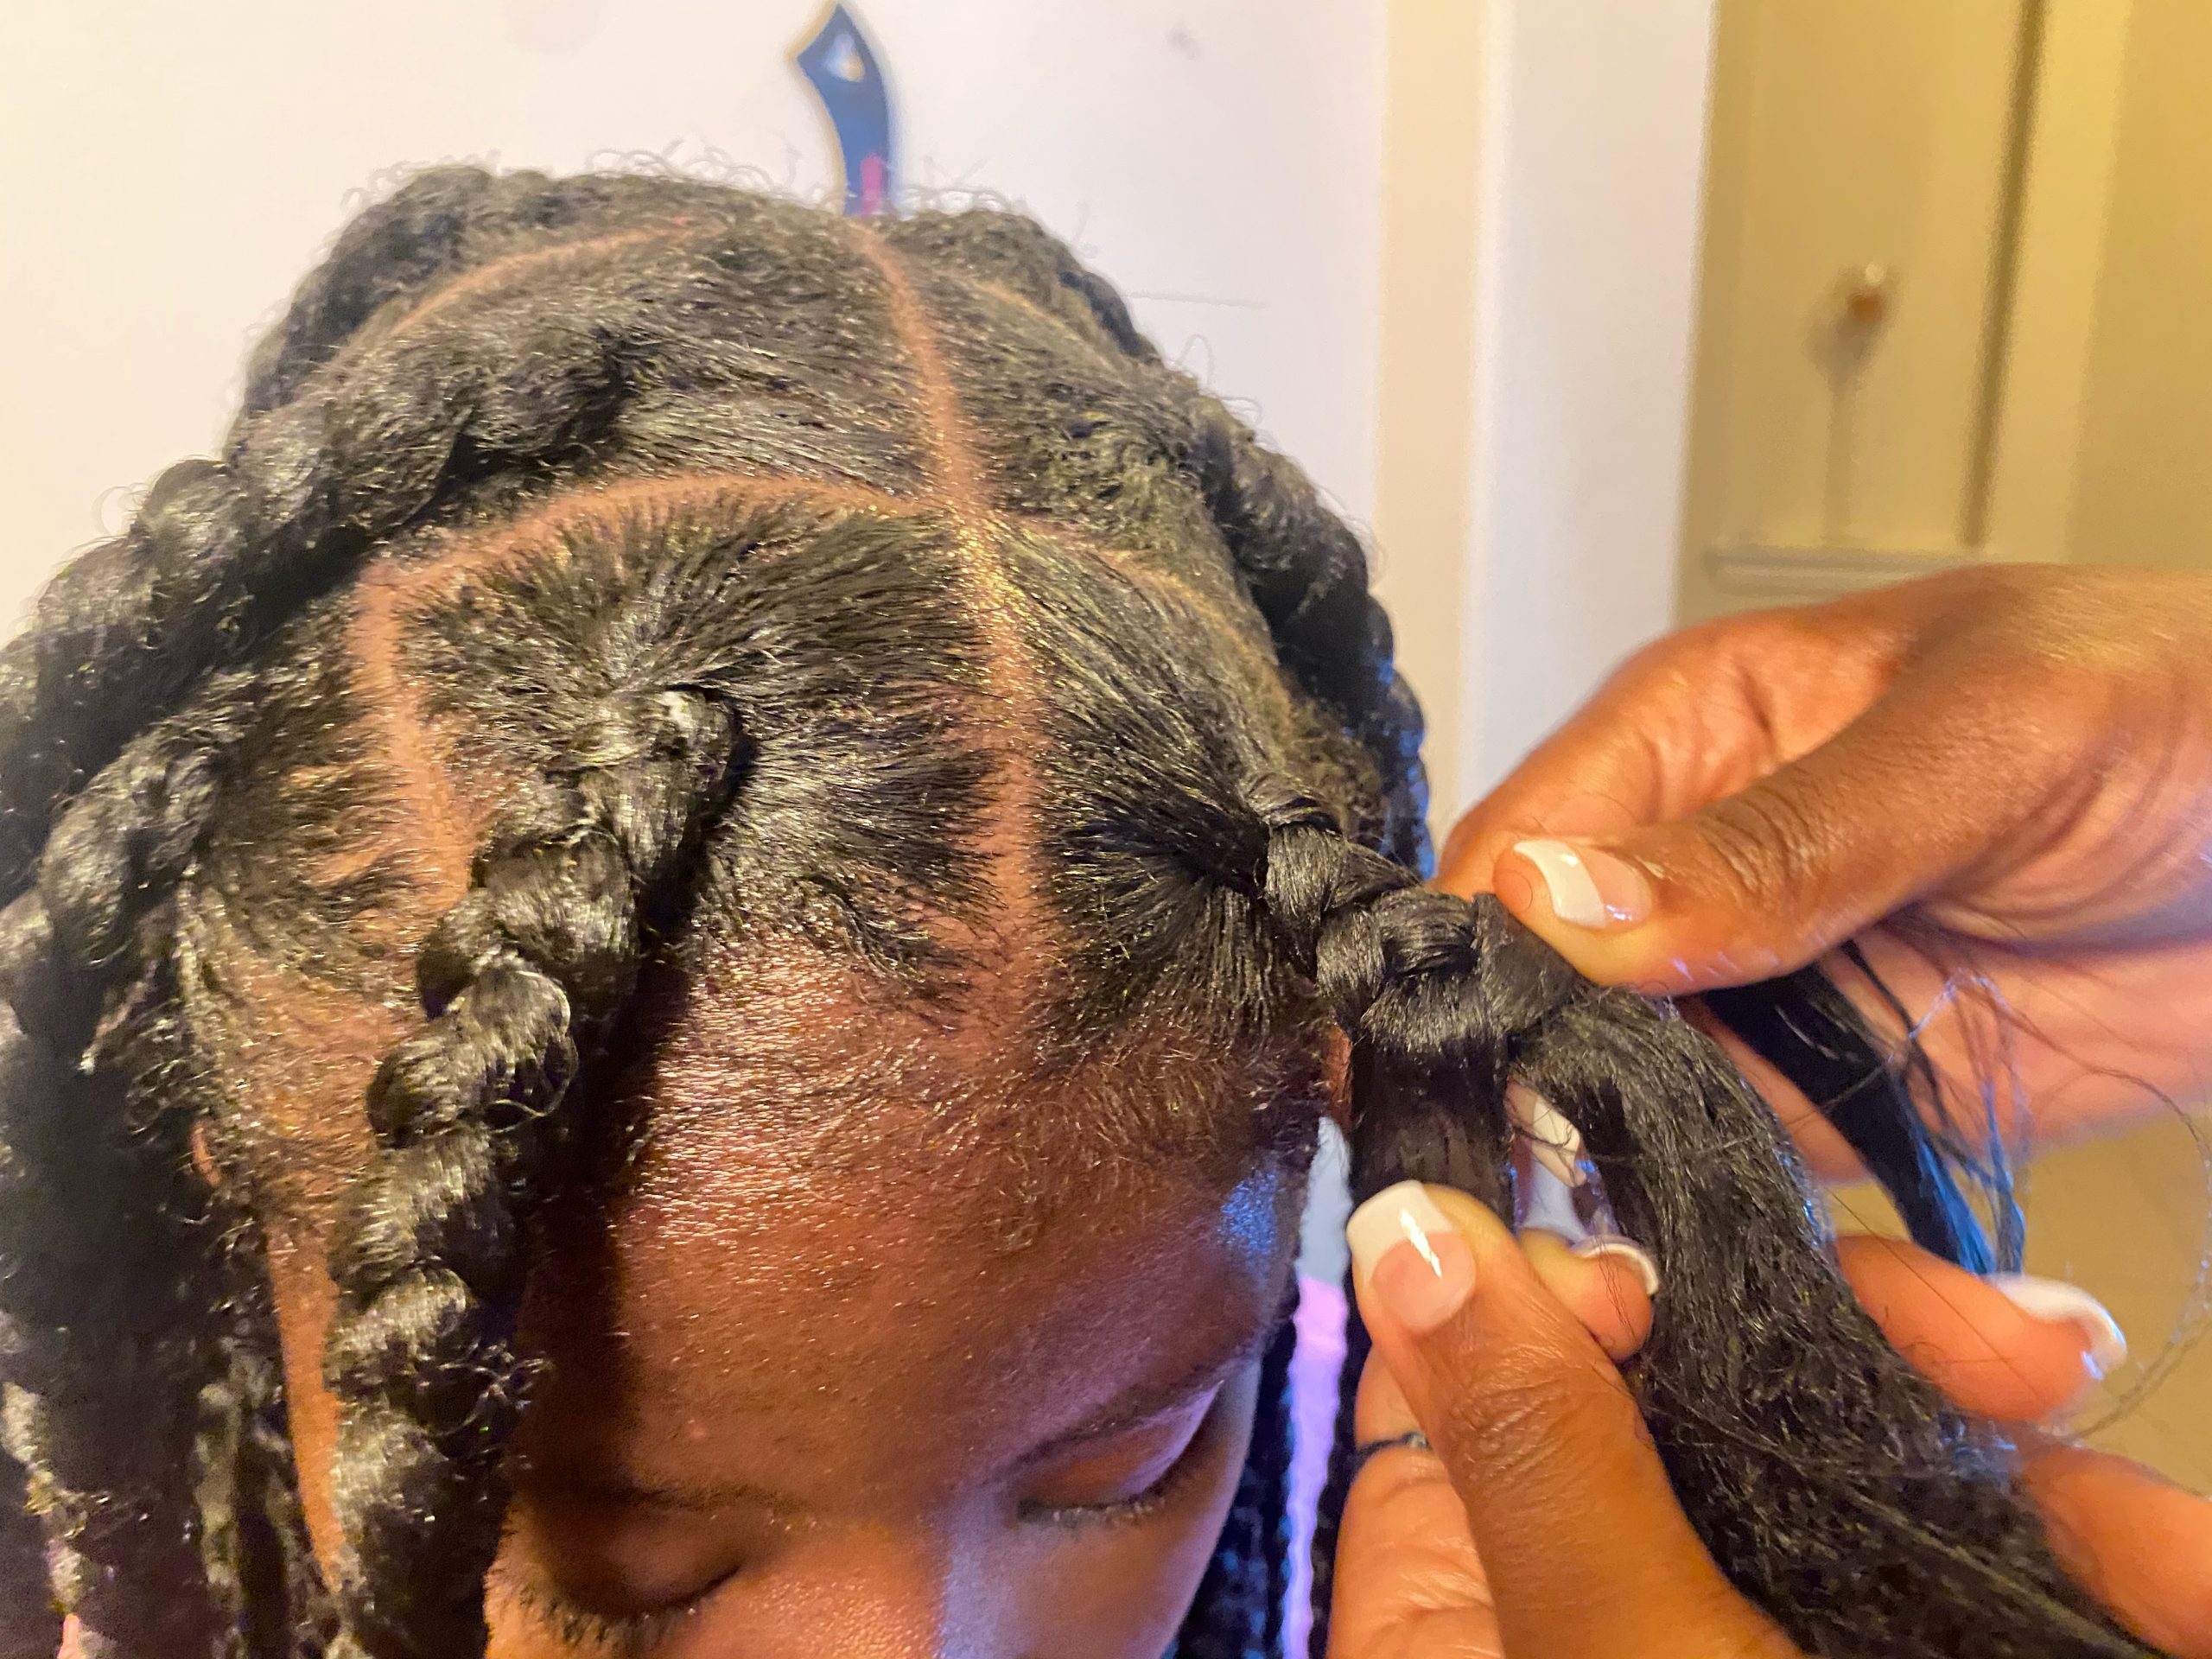 We Asked A Stylist To Break Down How To Achieve Knotless Braids Like Coi Leray’s